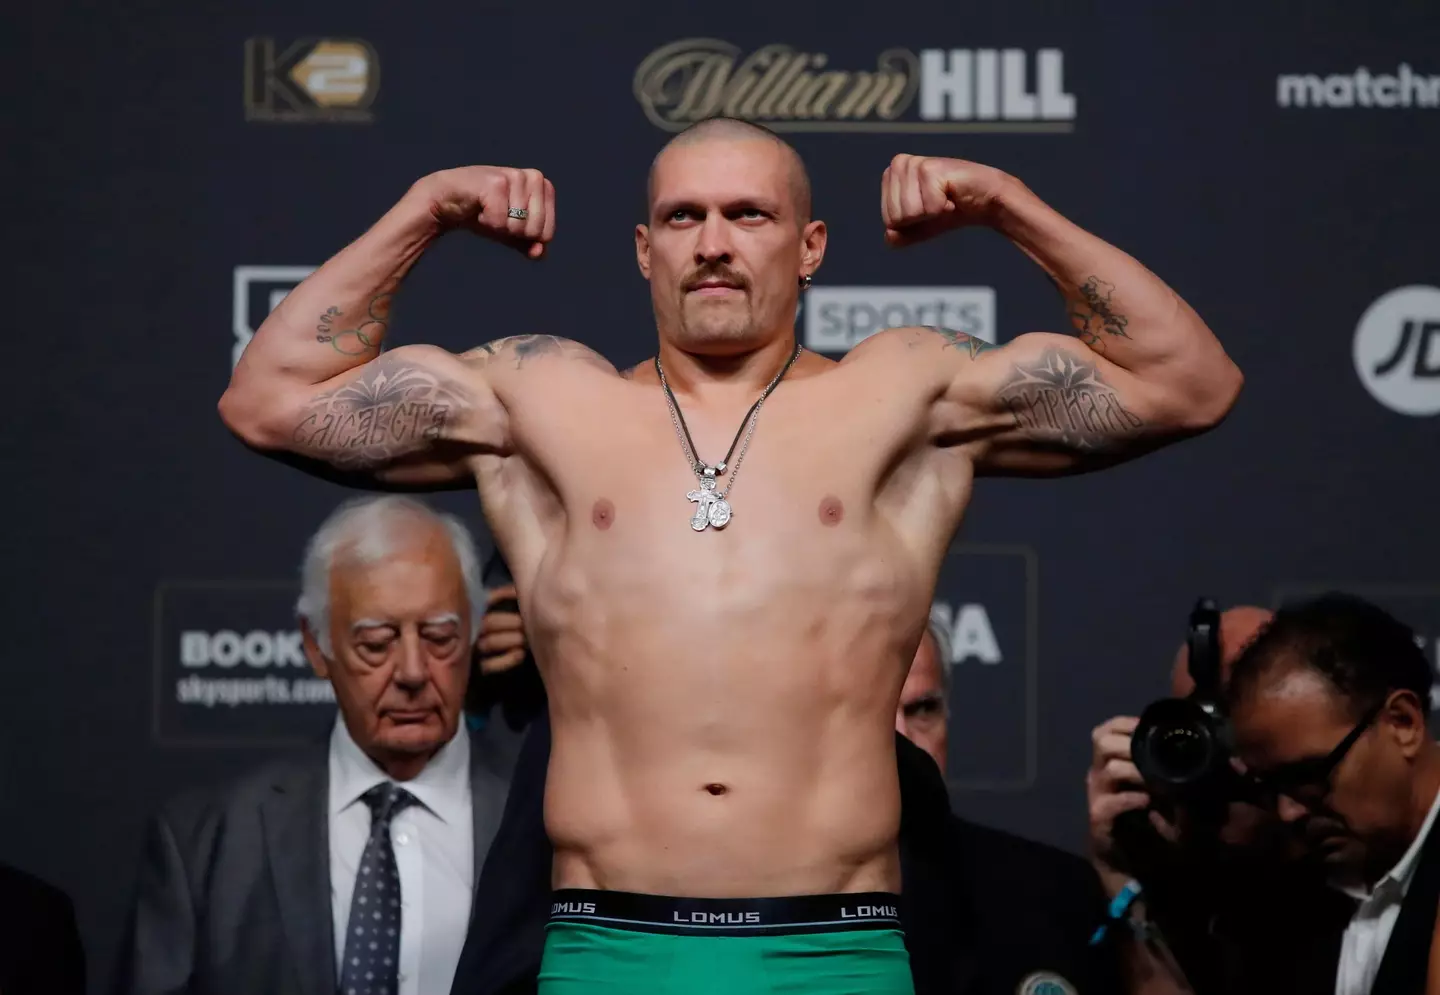 Usyk was expected to face Anthony Joshua in a rematch later this year (Image: PA)